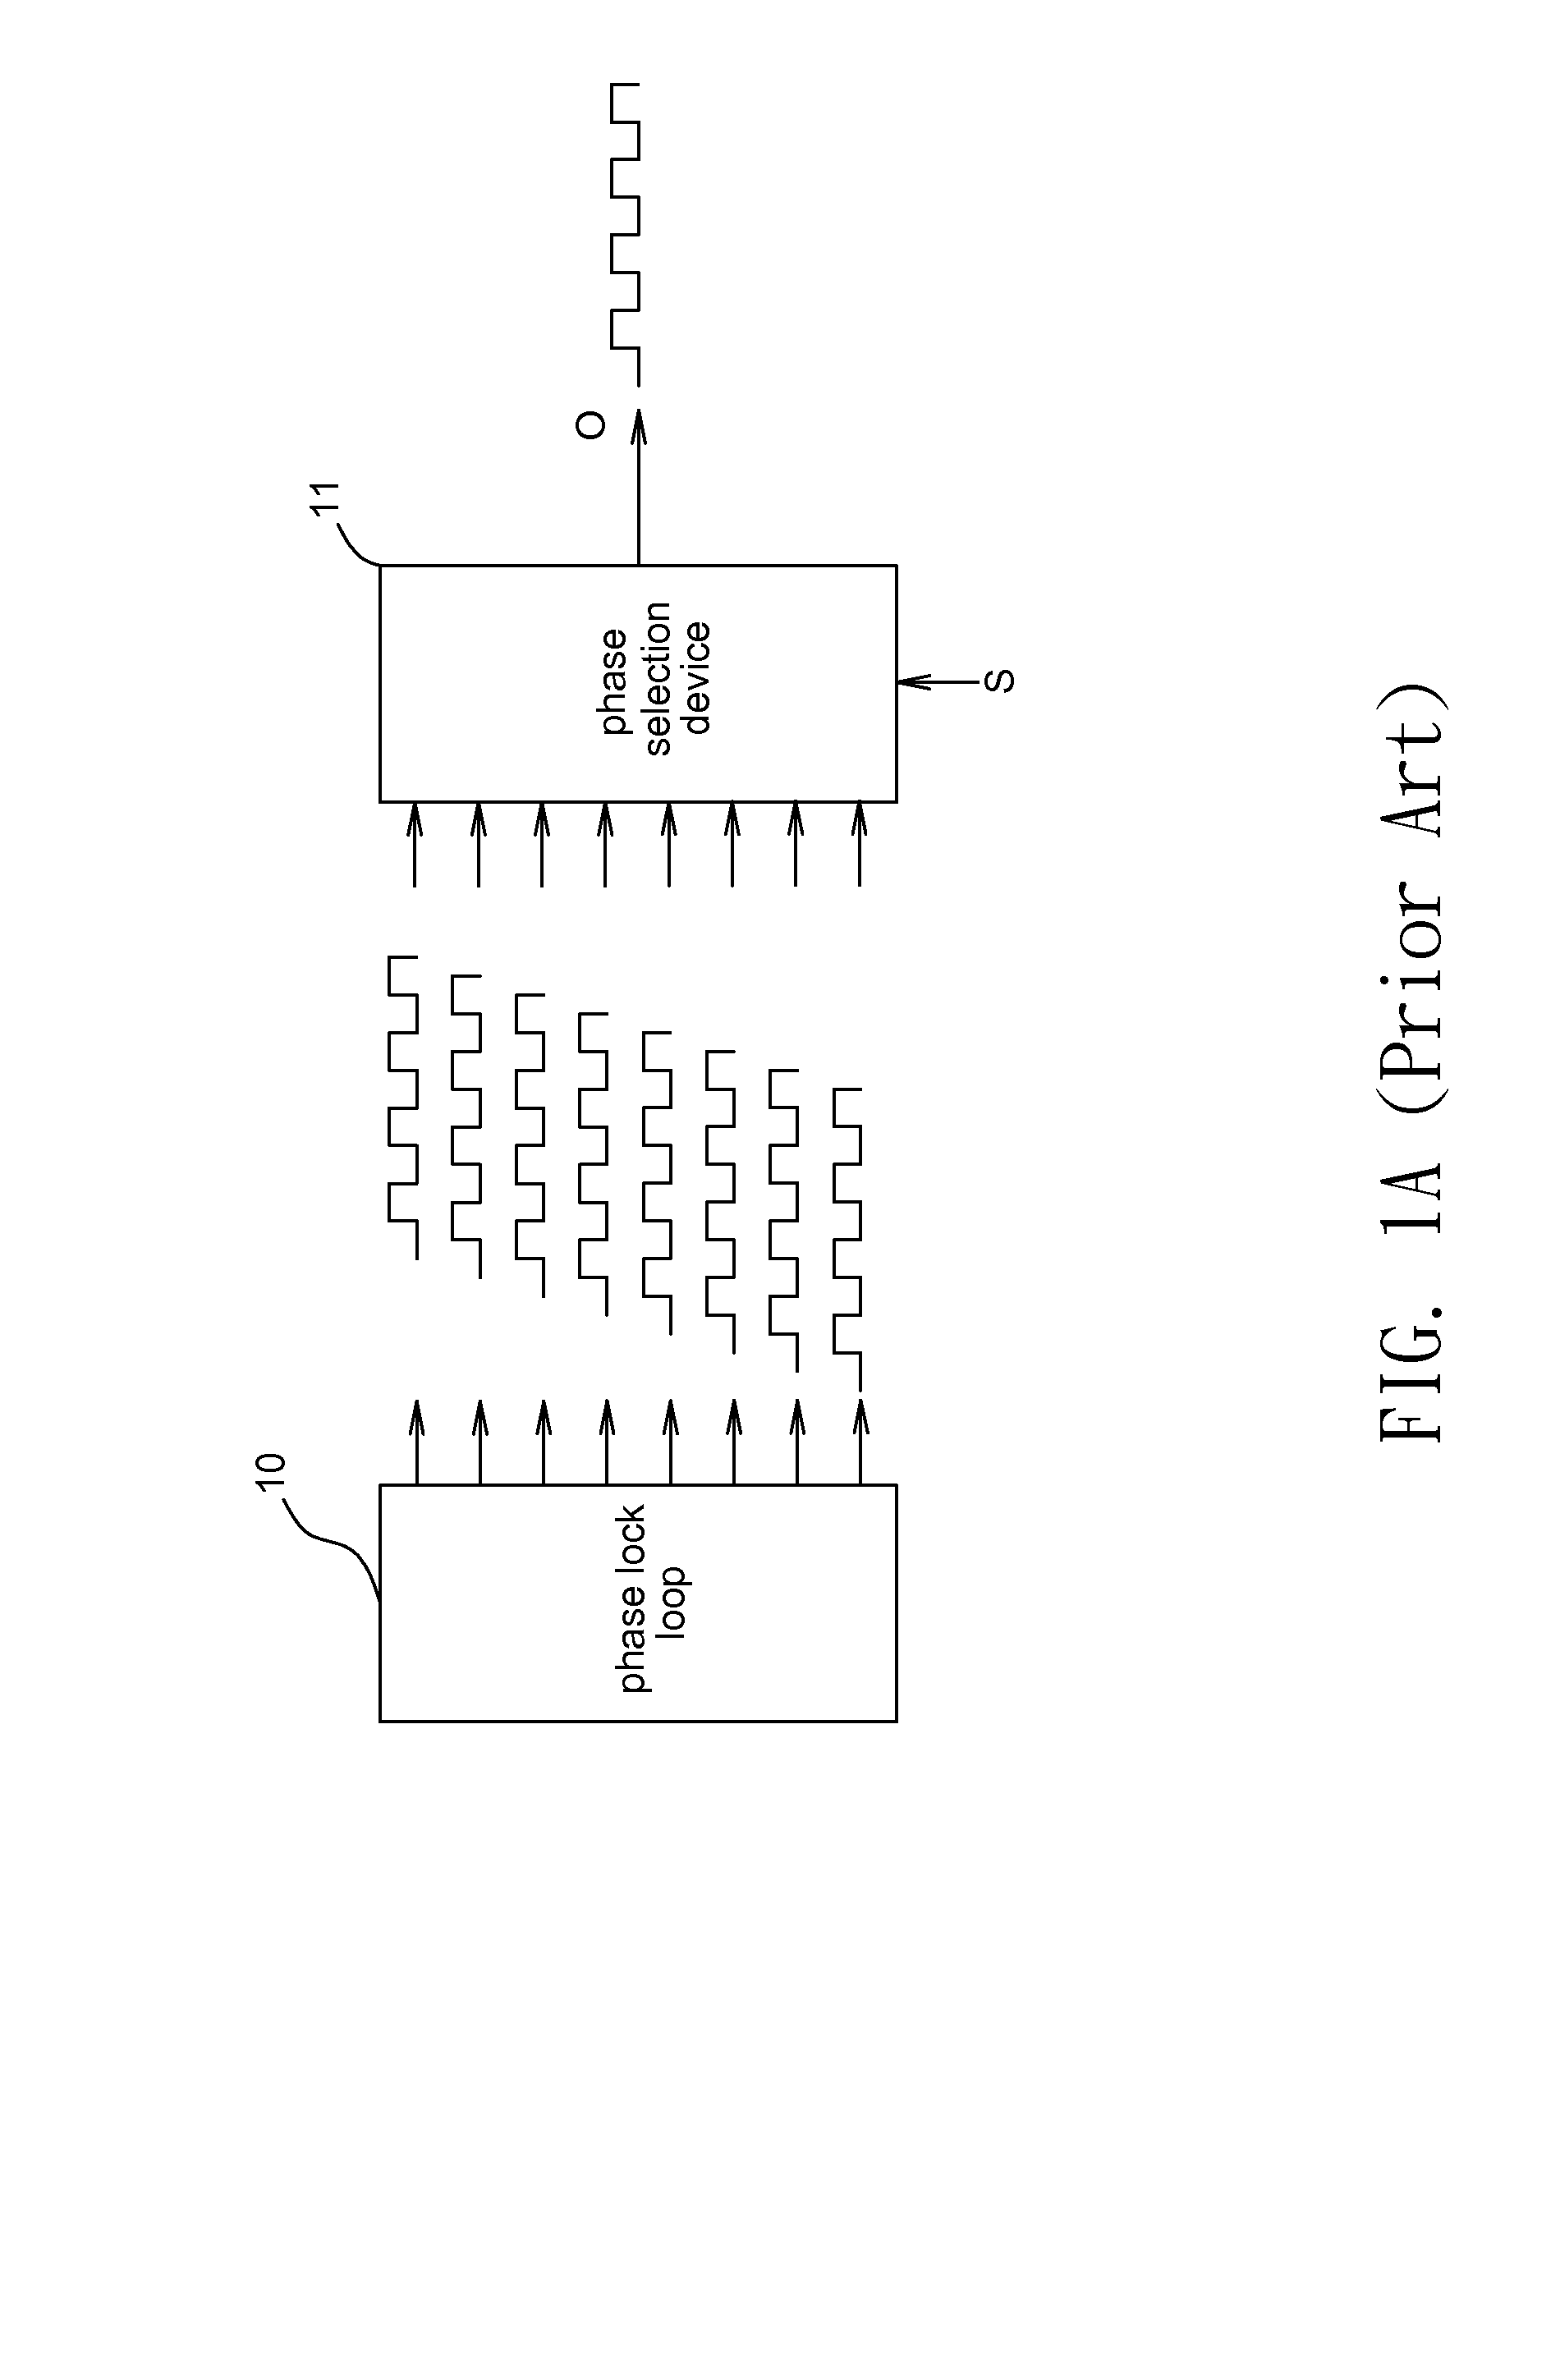 Multi-phase clock switching device and method thereof